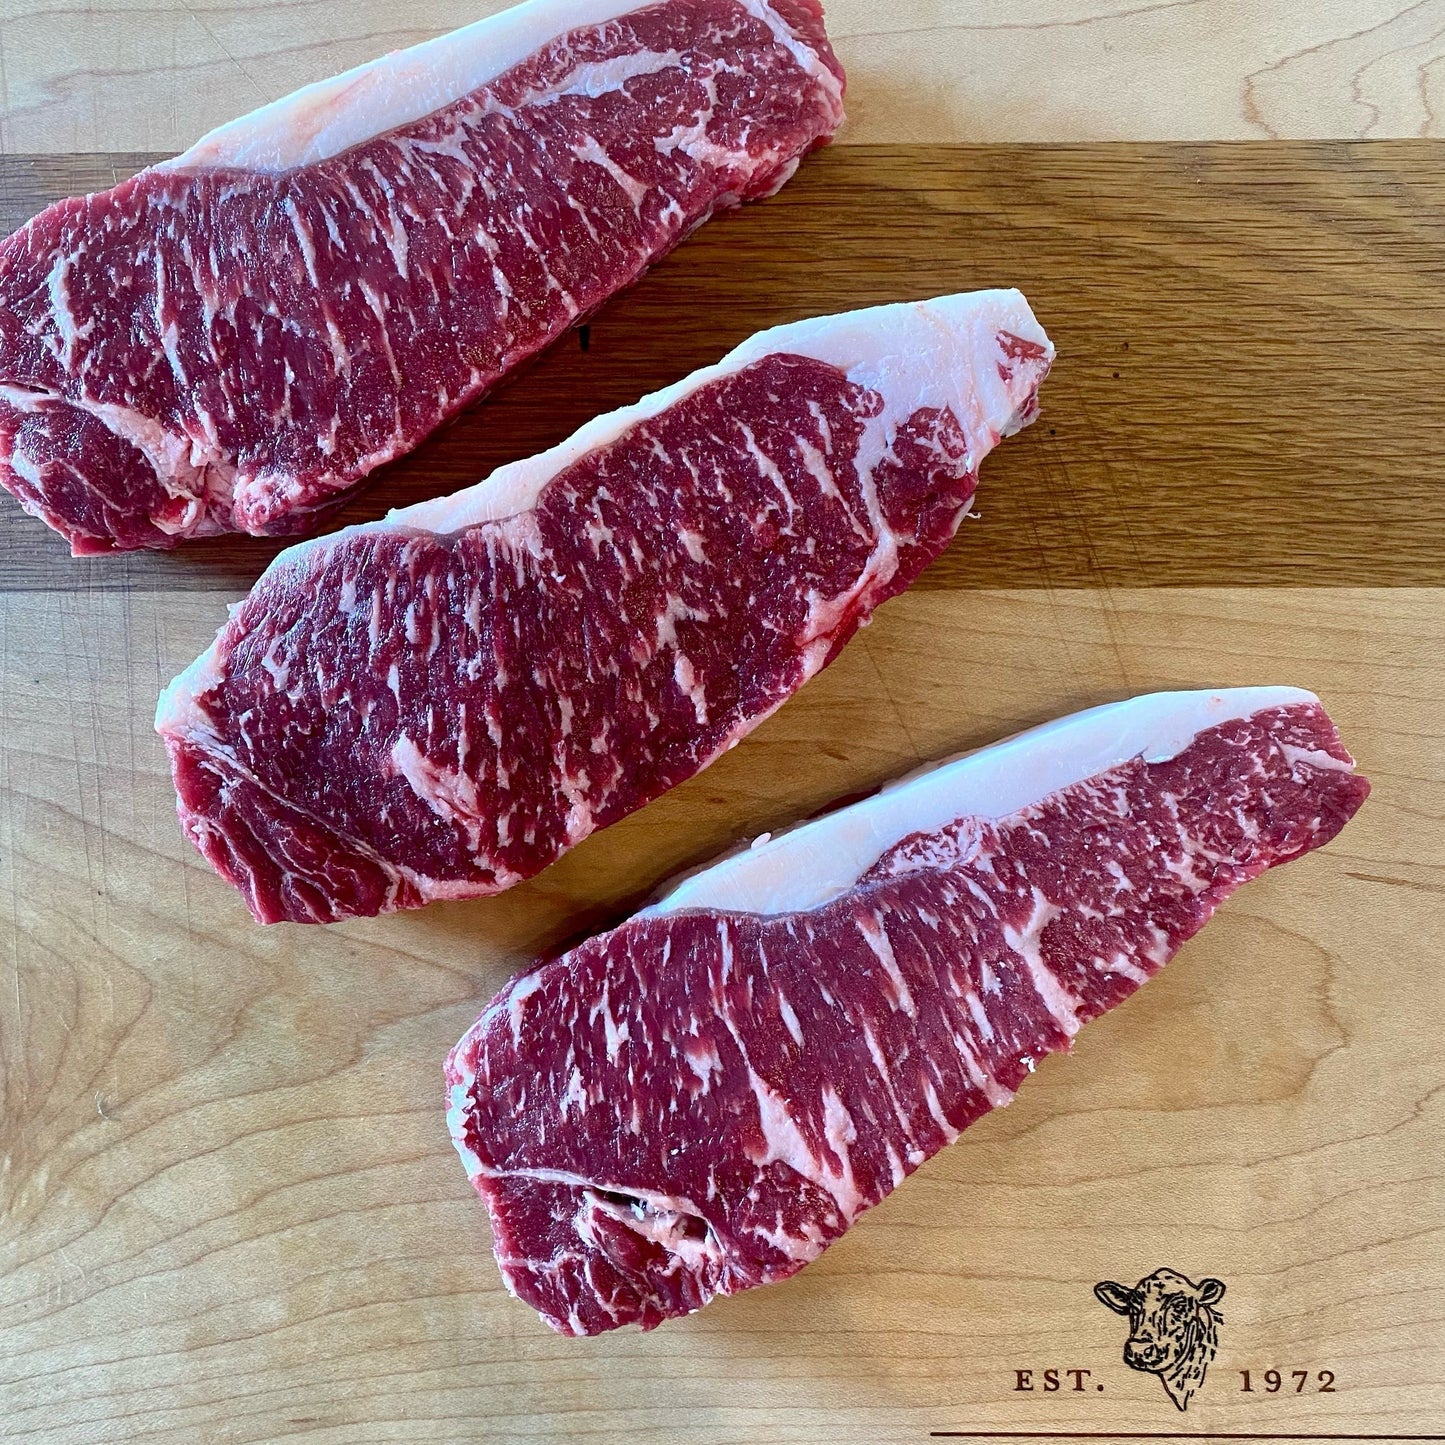 July 9th: All Things Steak with the Butchers